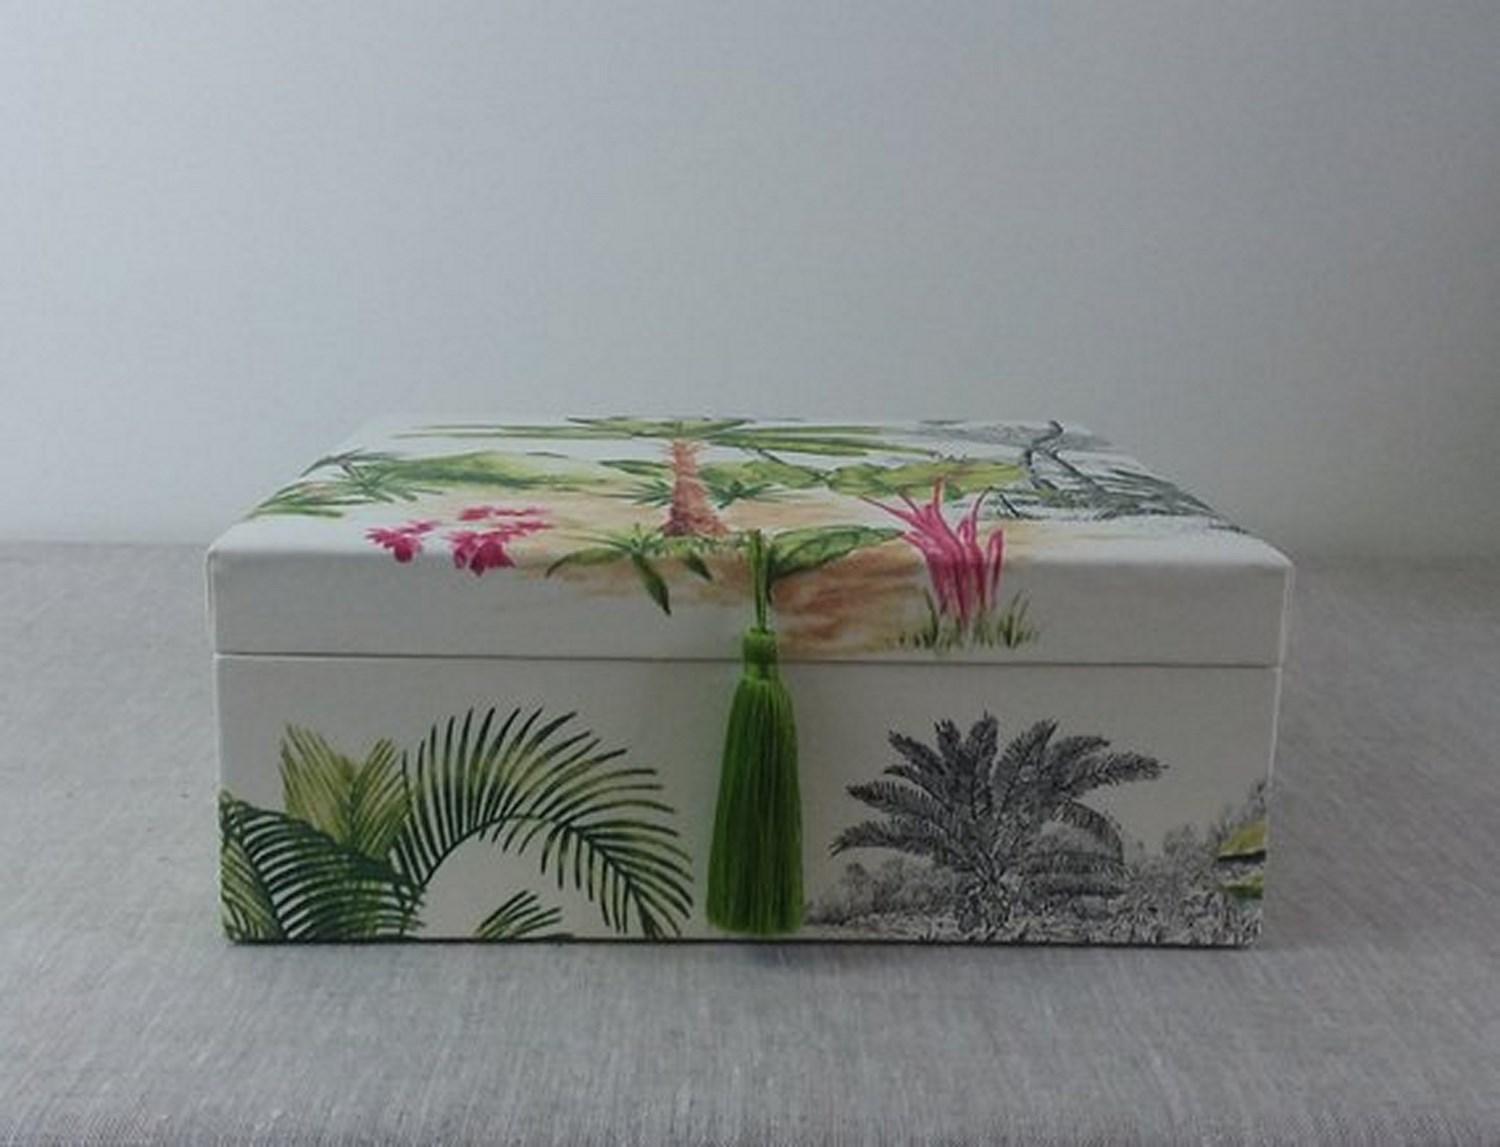 Beautiful storage box entirely handmade

Perfect for storing your Hermès scarves !

Made of Wood Cardboard and covered with Cotton Fabric

The lid is lightly padded and embellished with an green pompom

Pattern: Trees, Palm Trees

Colorways: White,